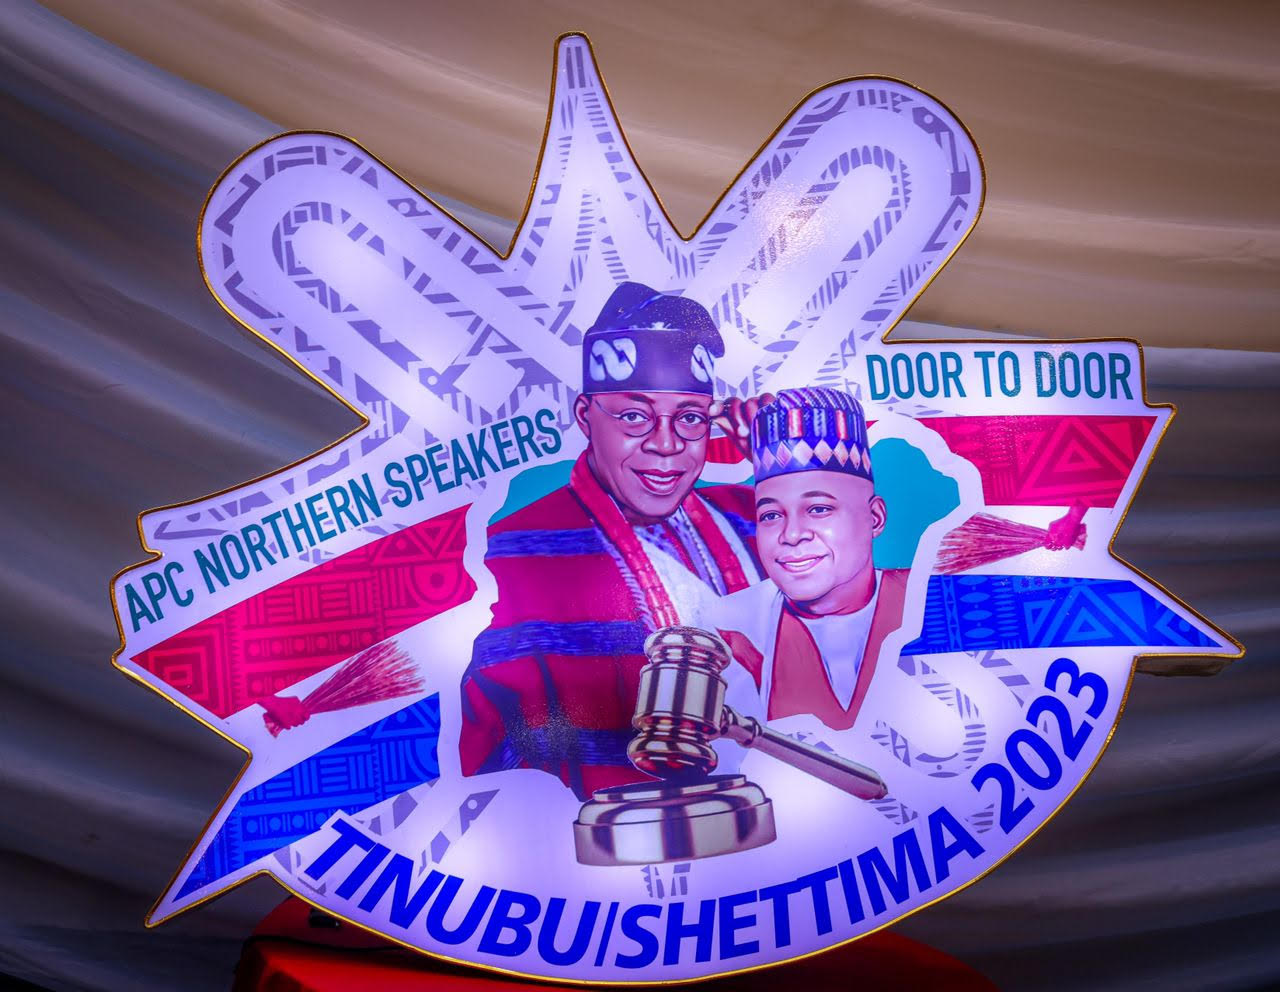 Gov Lalong, APC Presidential Candidate, Unveils APC Northern Speakers door to door for Tinubu/Shettima 2023